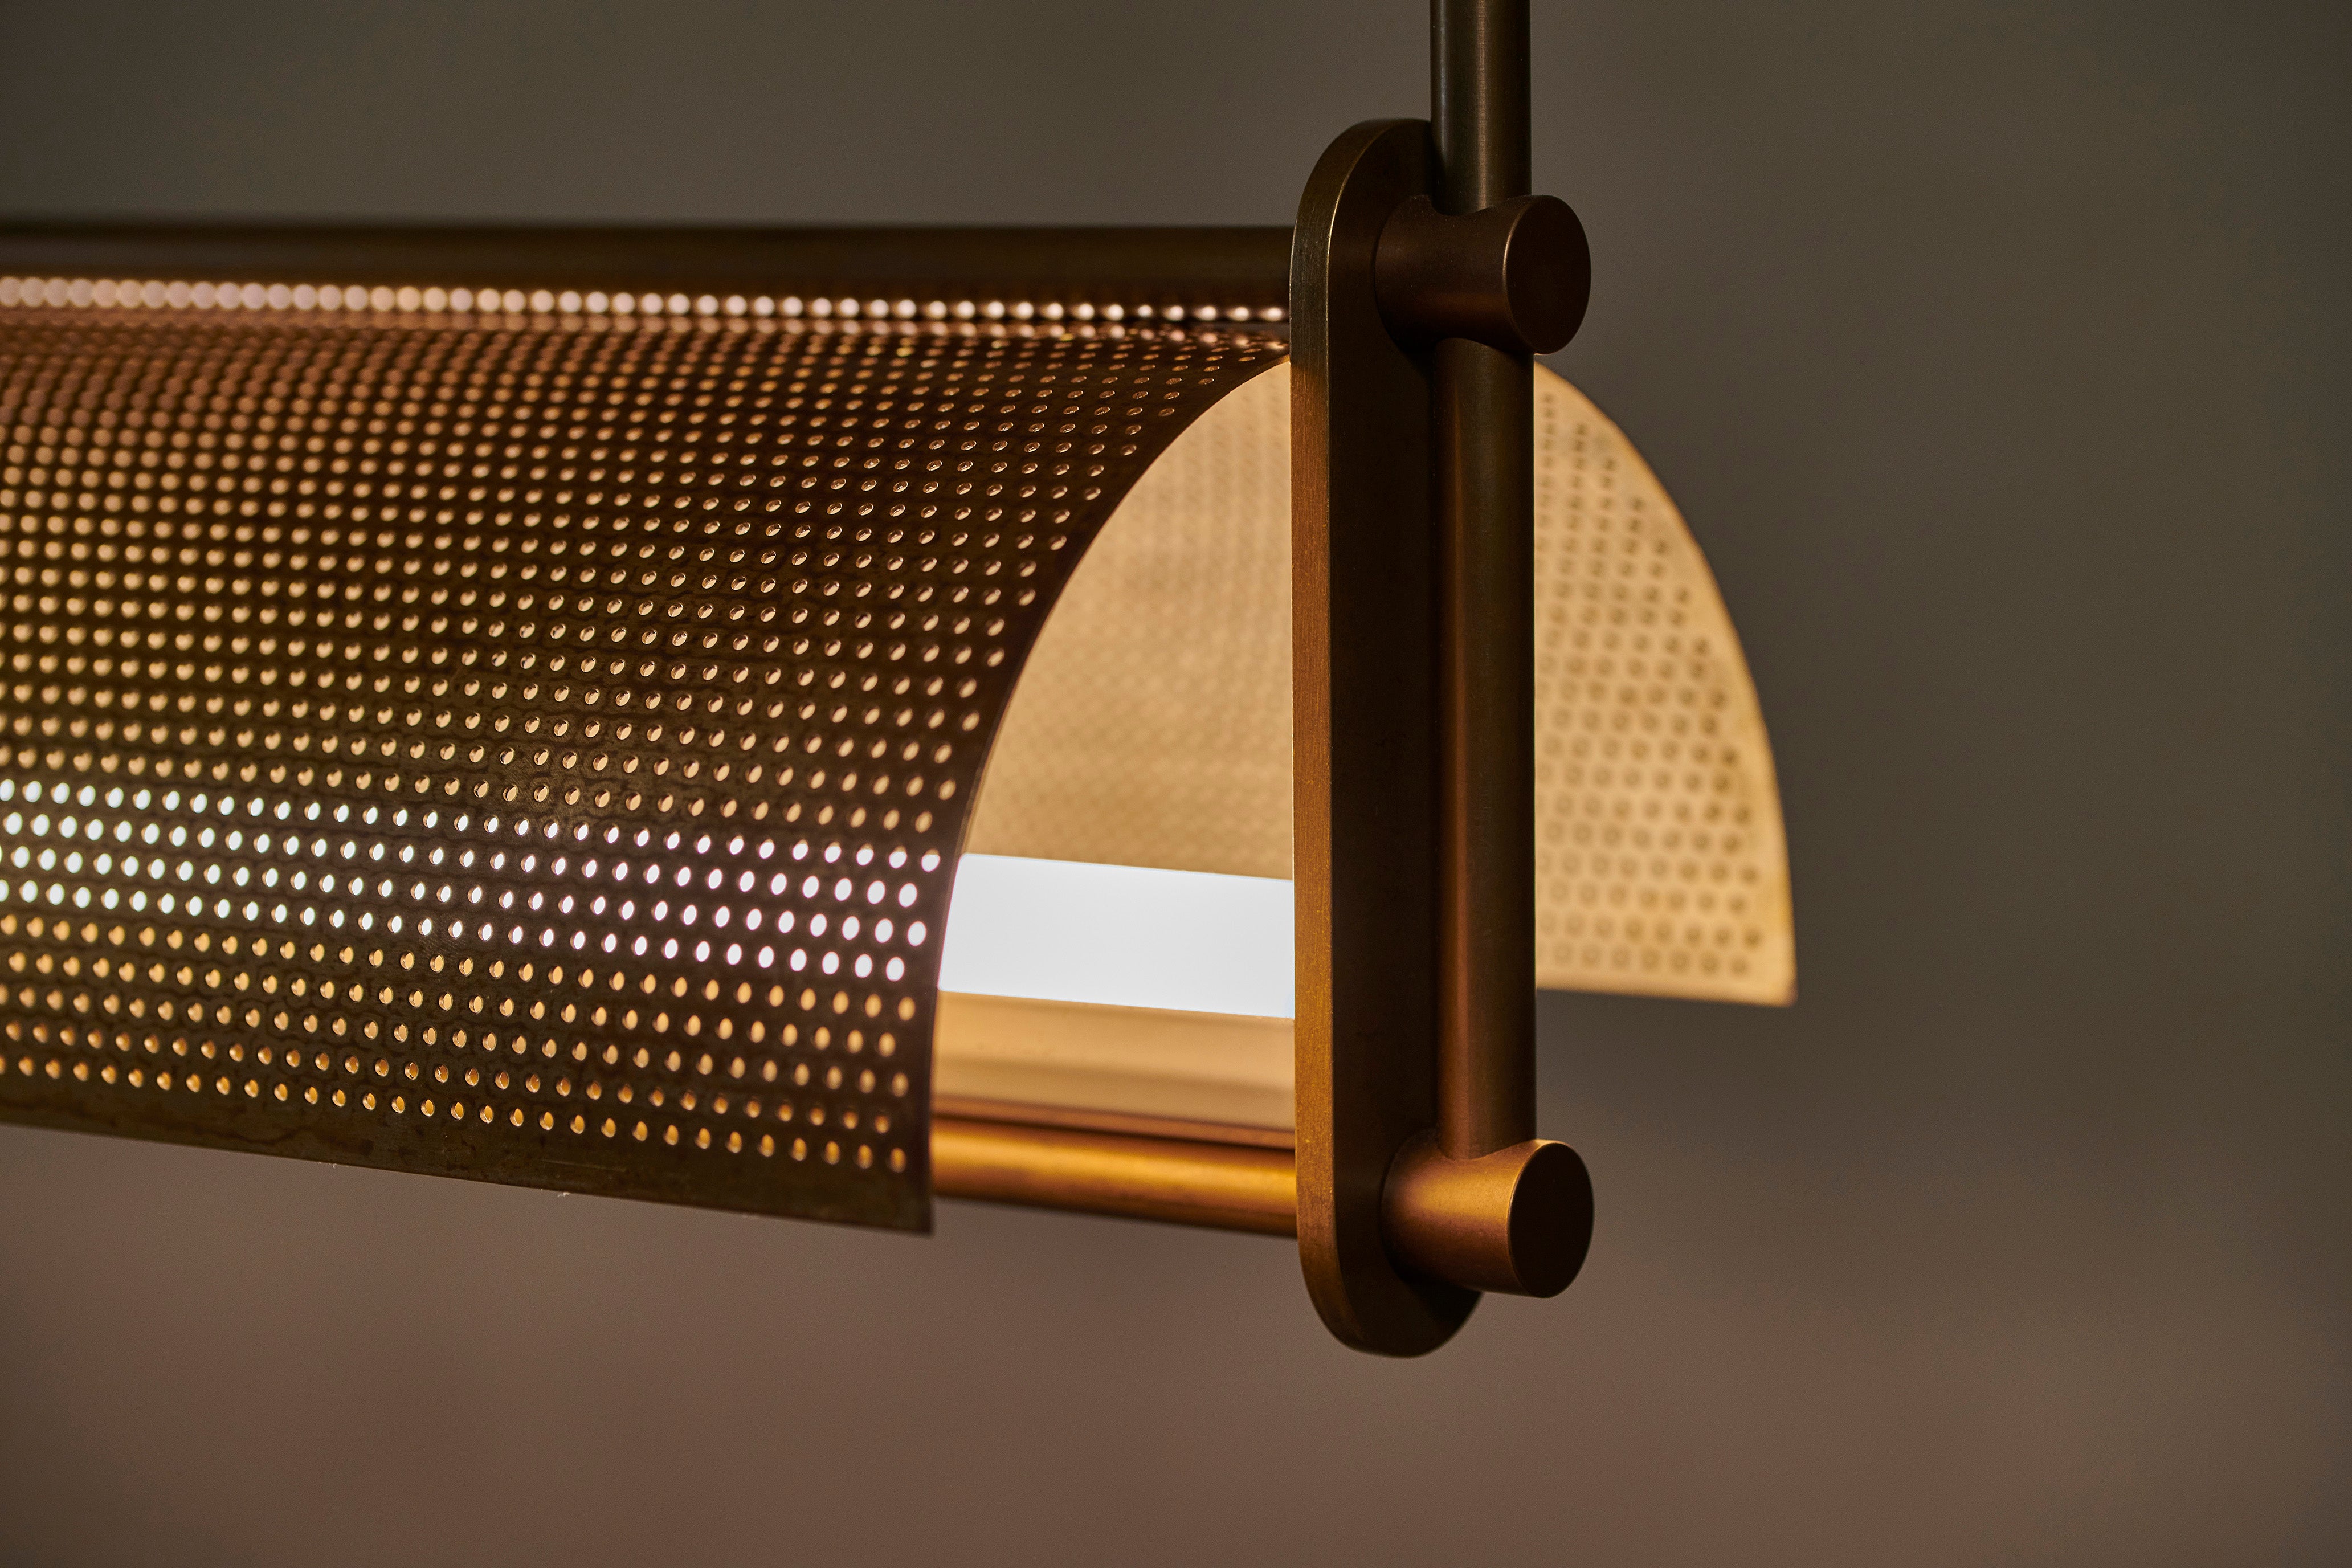 Handcrafted brass linear pendant by Transmitt. Made in Australia.